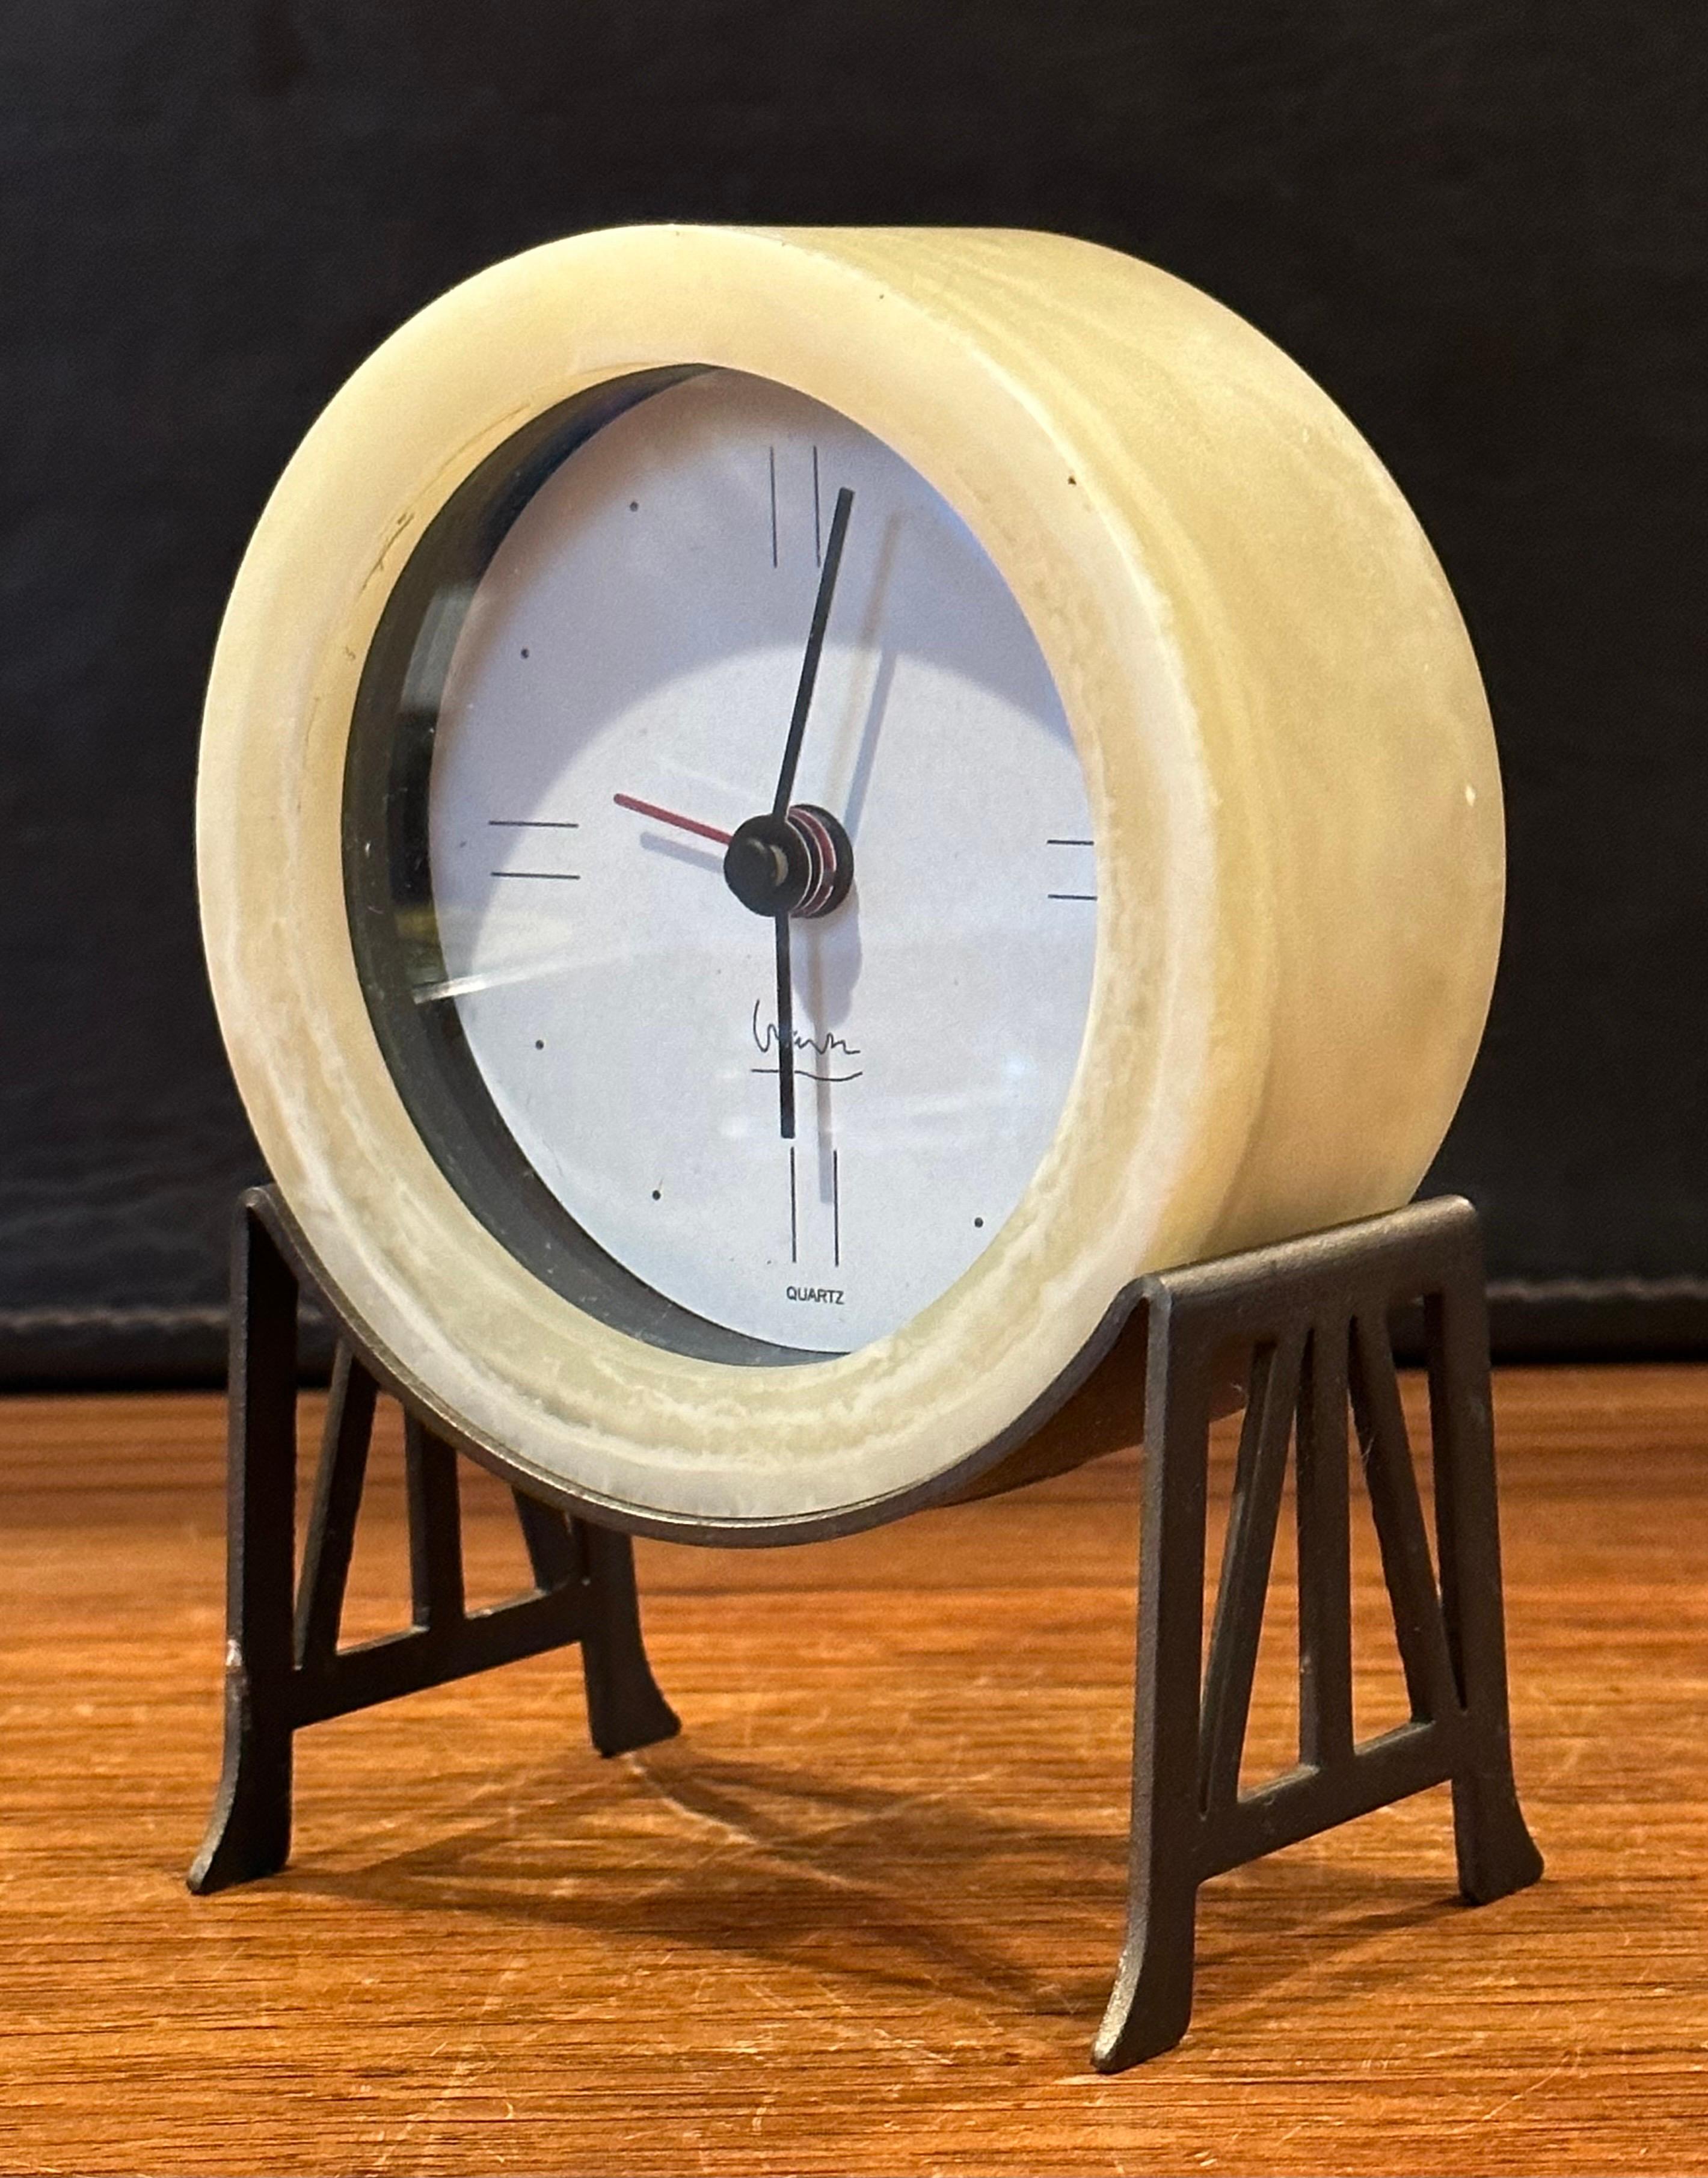 20th Century Post-Modern Desk Clock by Michael Graves For Sale